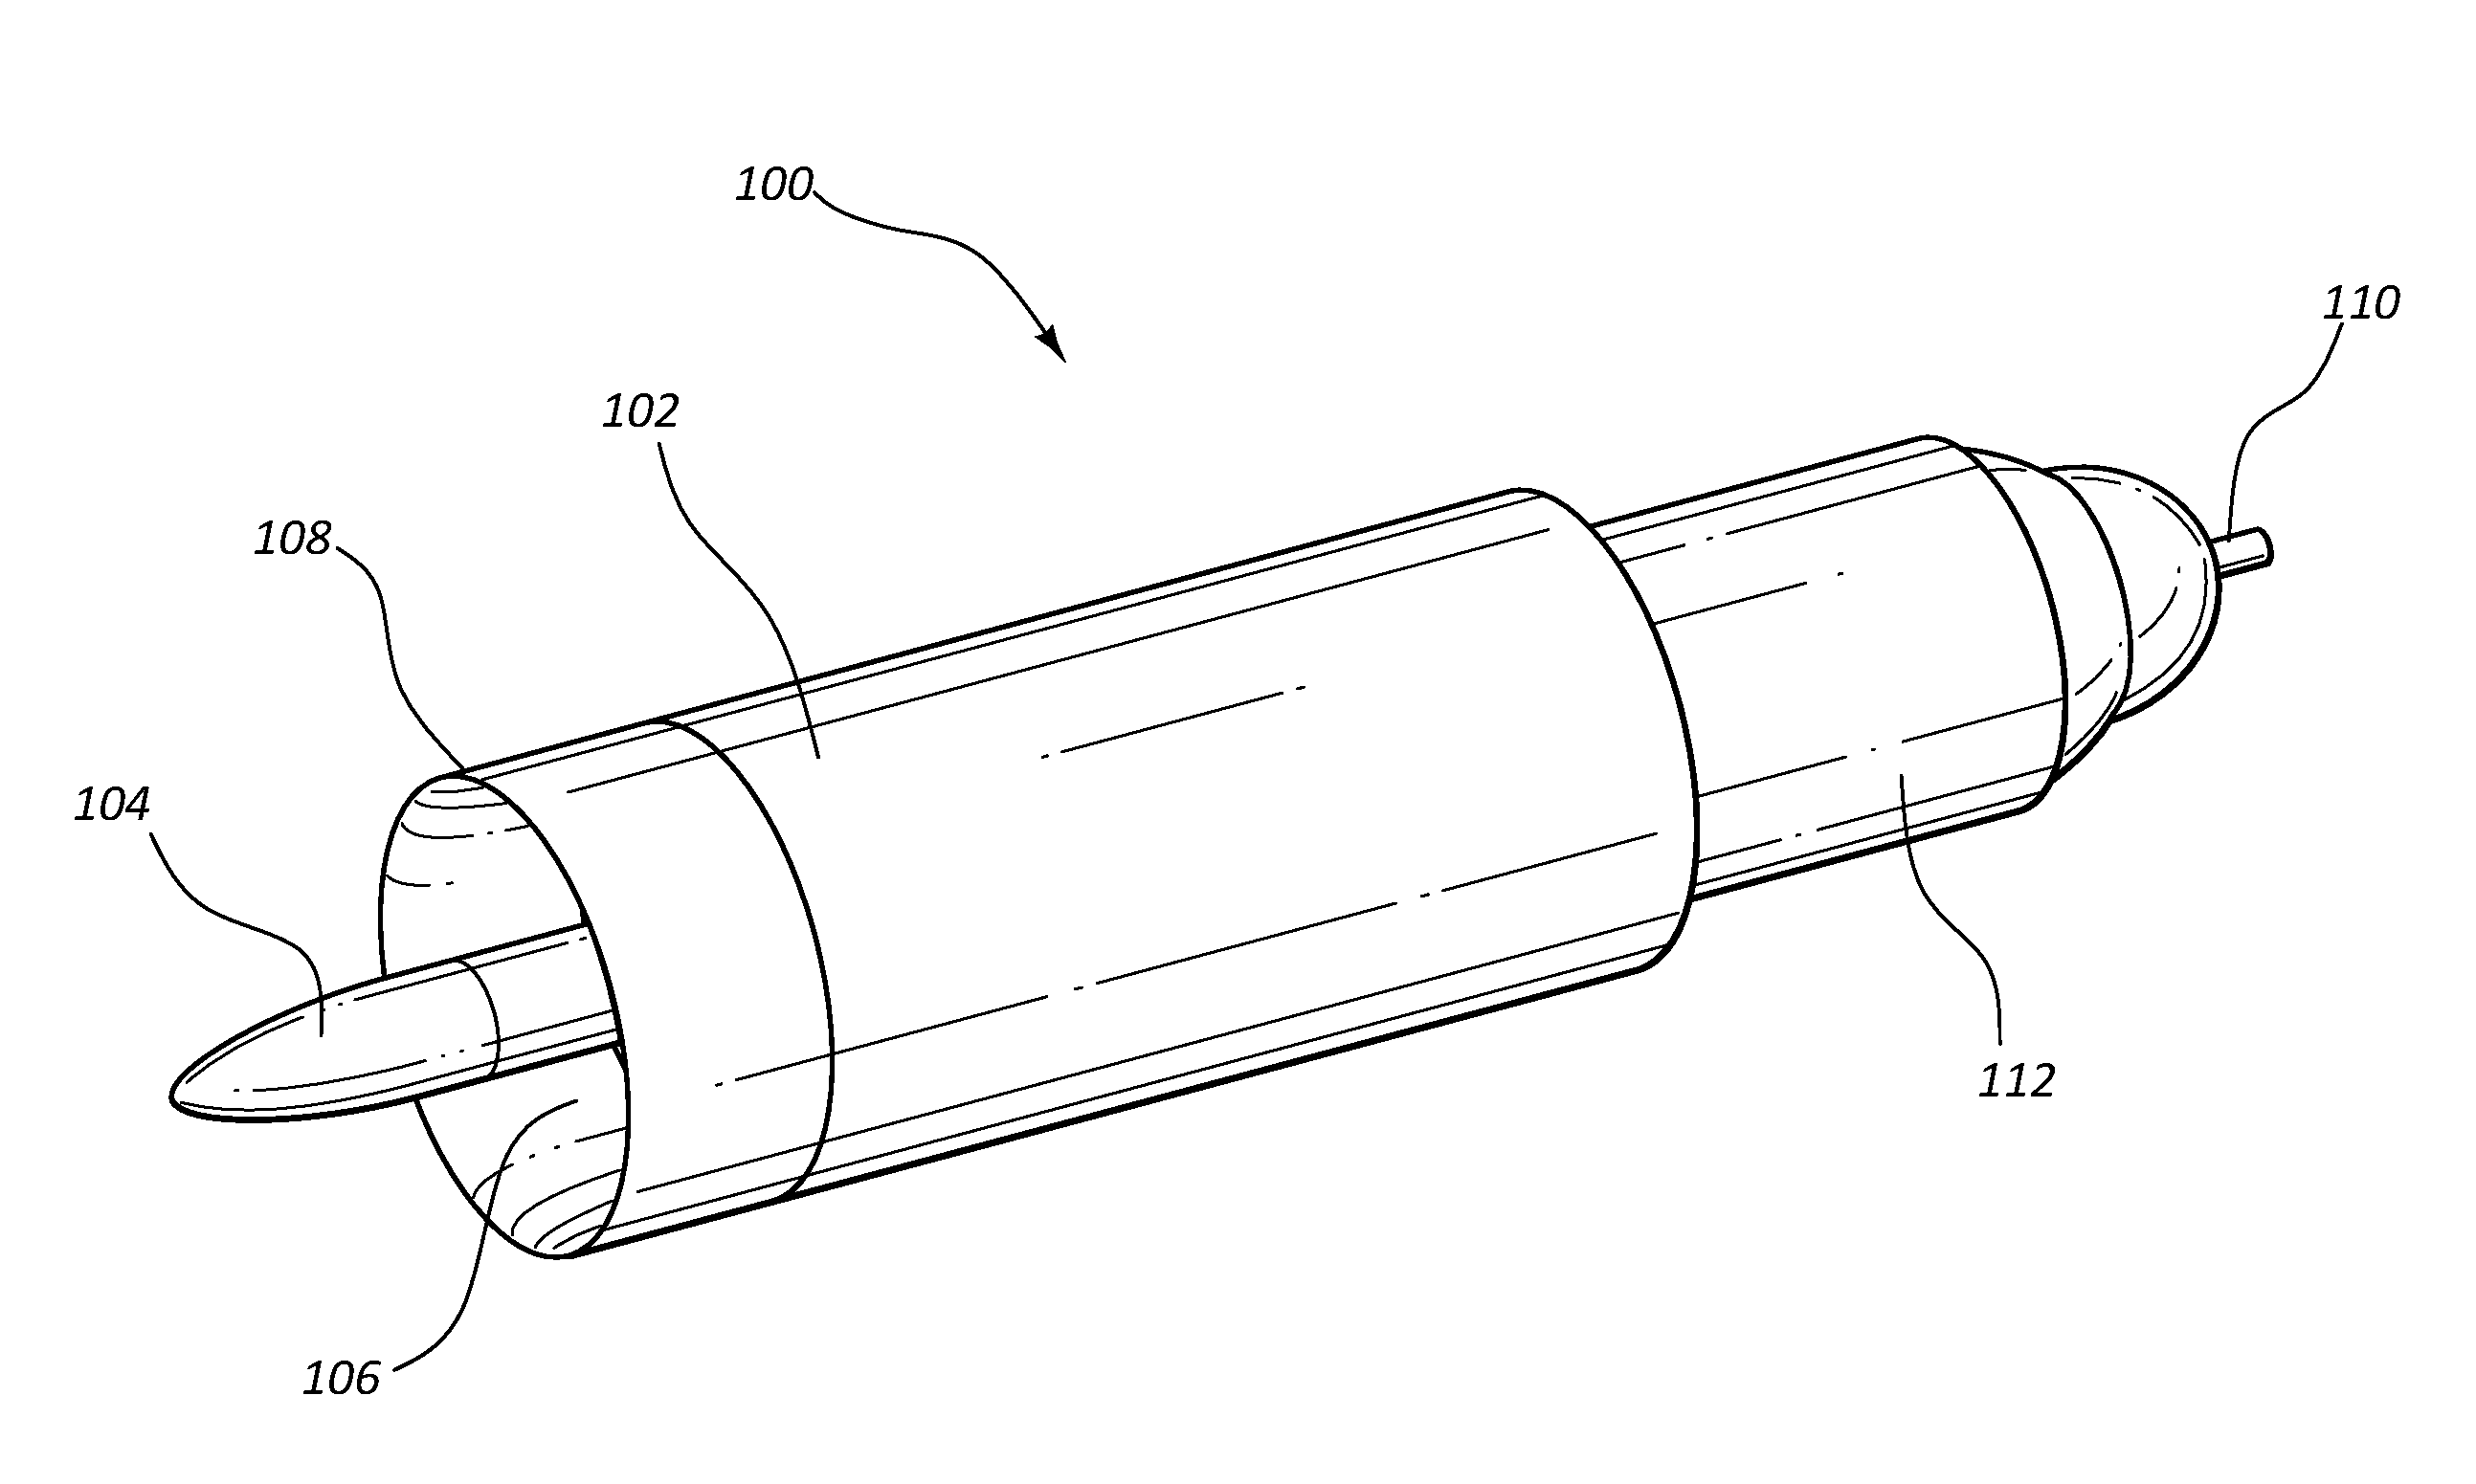 Systems, methods, and devices for fluid data sensing